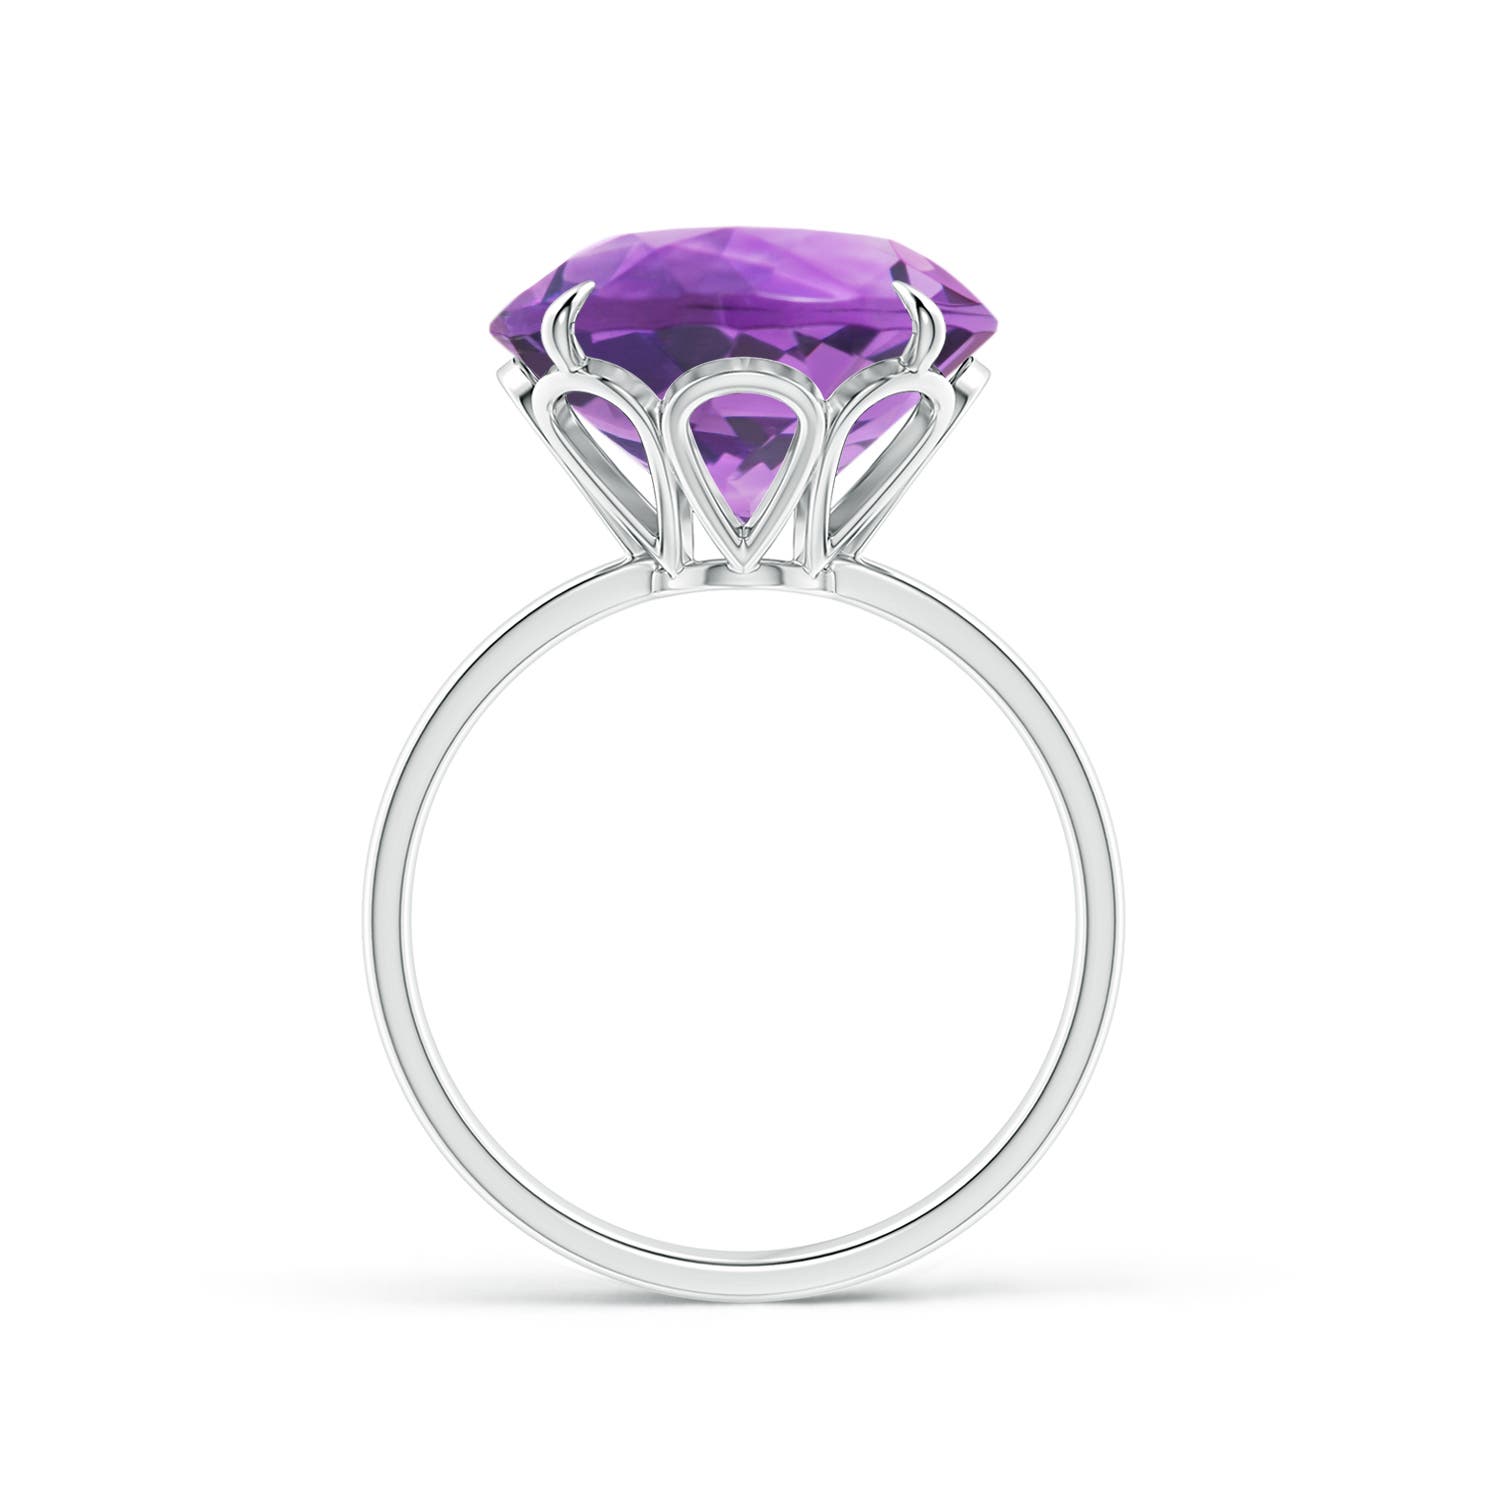 AA - Amethyst / 7.2 CT / 14 KT White Gold